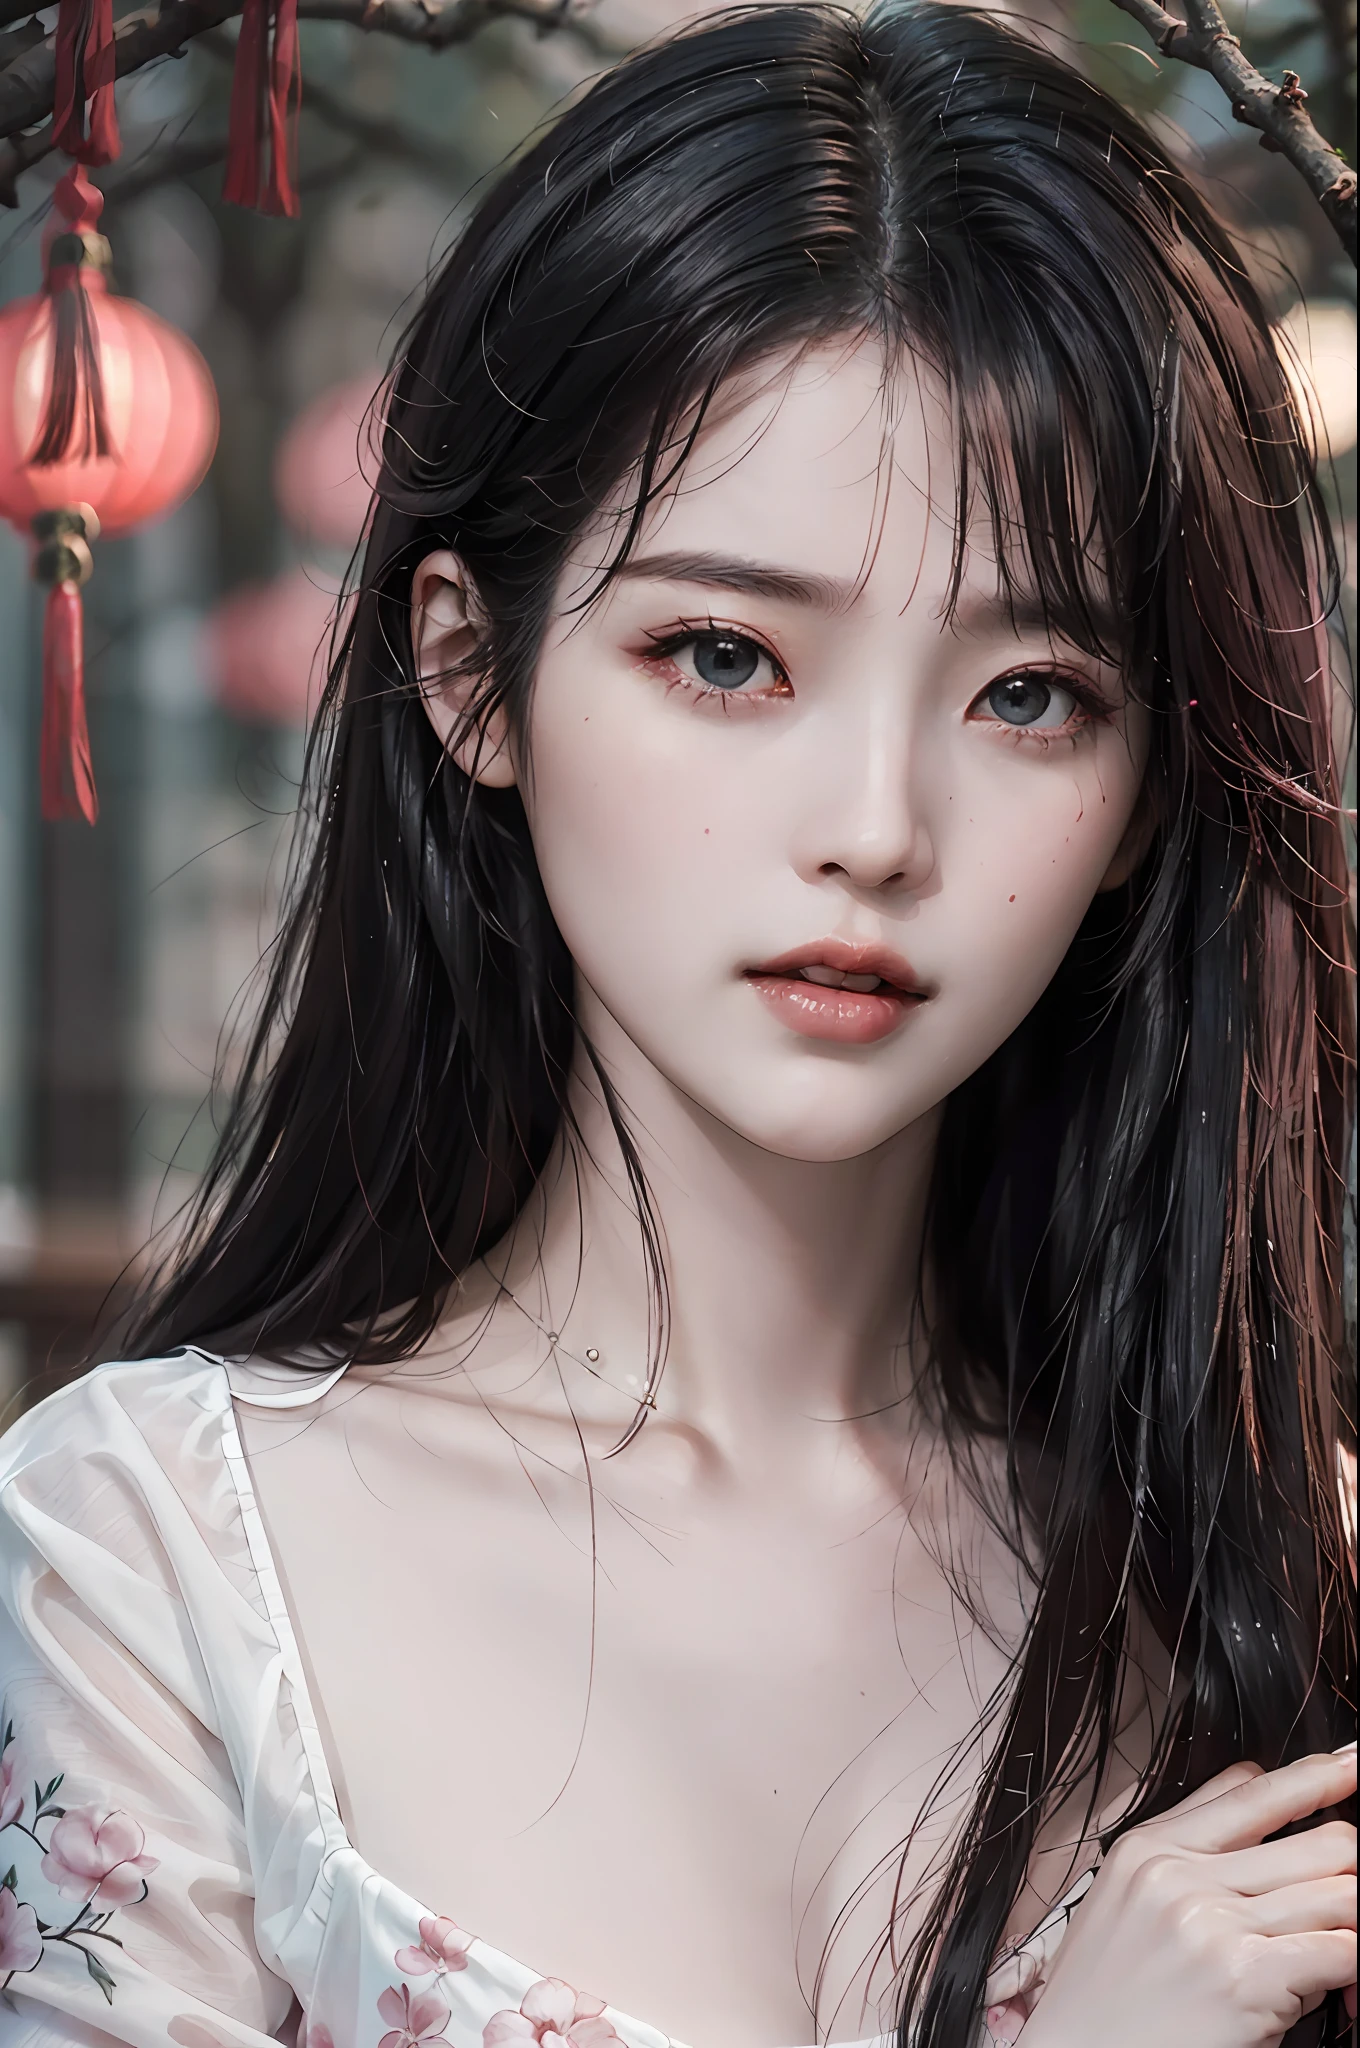 Masterpiece, Excellent, Night, Outdoor, Rainy Day, Branches, Chinese Style, Ancient China, 1 Woman, Mature Woman, Long Black Hair, Pale Pink Lips, Cold, Serious, Effeminate, Bangs,